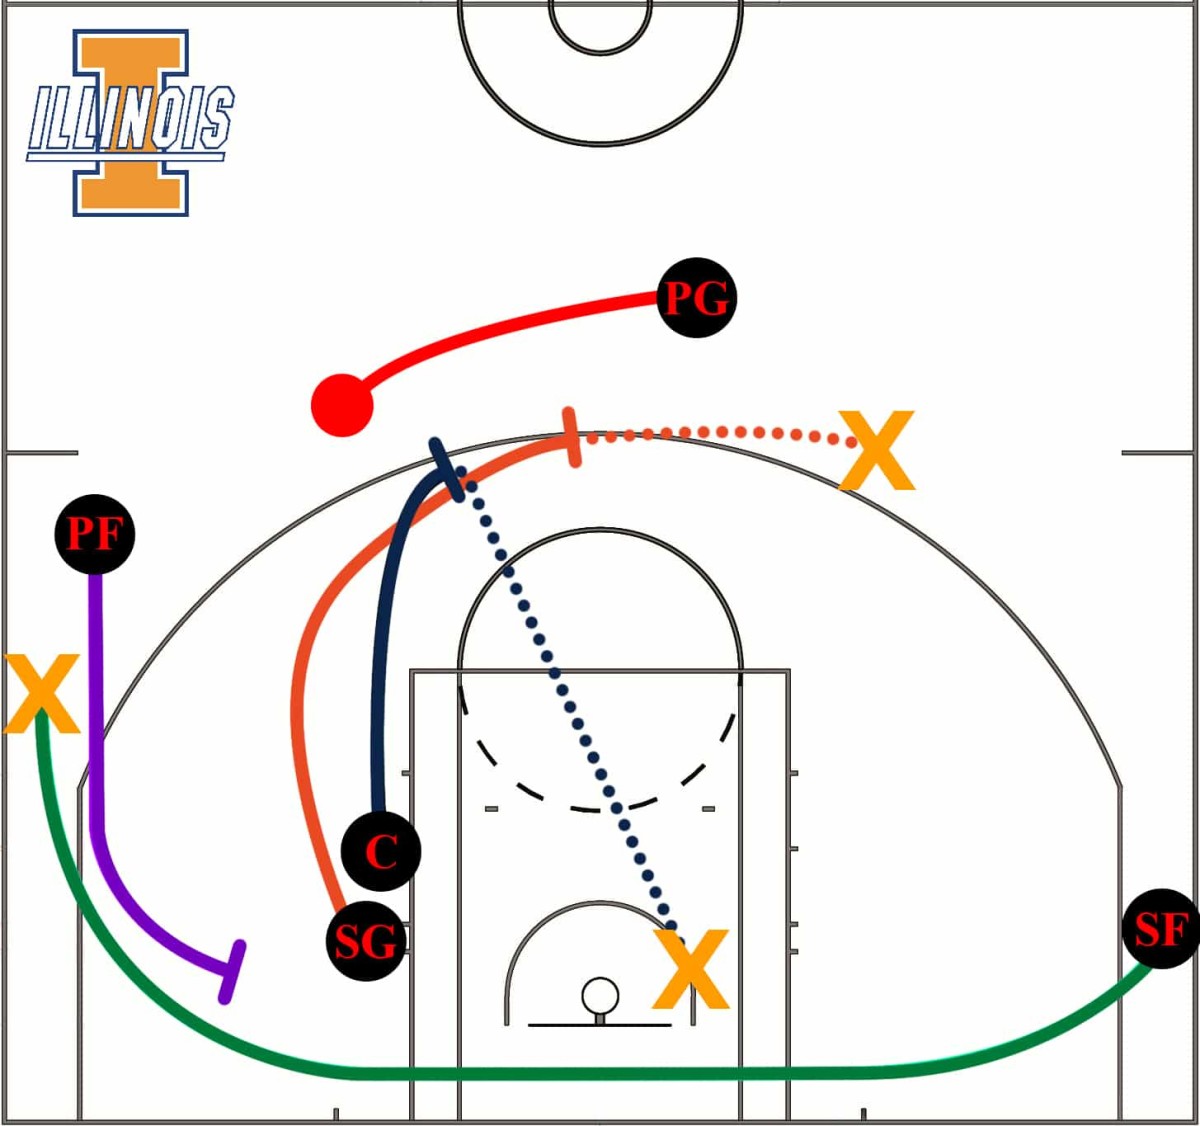 The SF and PF are running an independent pin-down action simultaneously. The Spain PnR is just the PG, SG, and C.